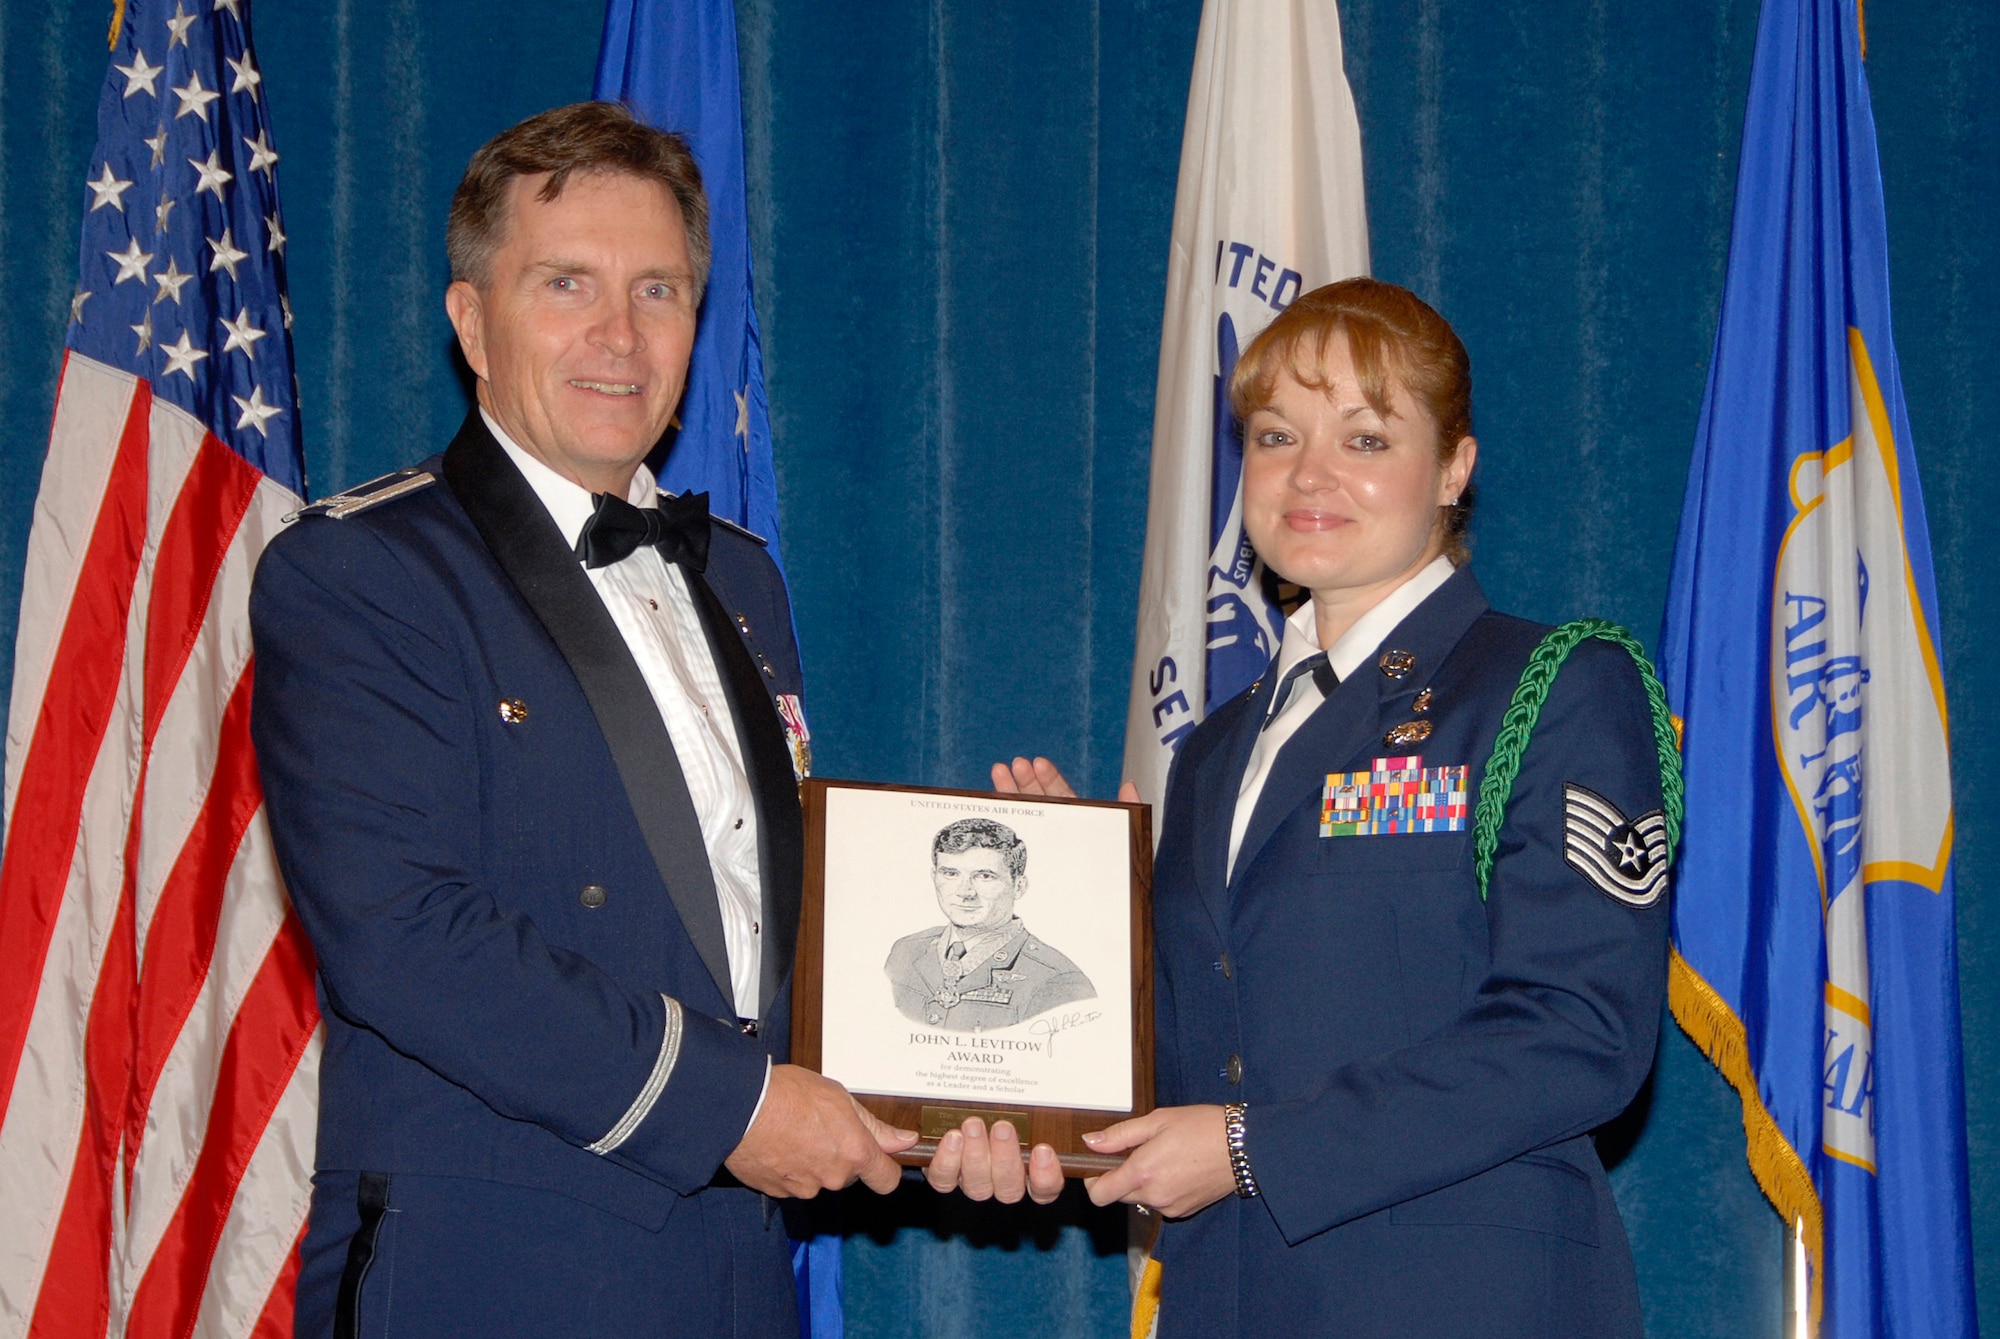 McGHEE TYSON AIR NATIONAL GUARD BASE, Tenn. -- Tech. Sgt. Jennifer M. Pahl, the NCOIC, military health flight of the 49th Medical Operations Squadron at Holloman AFB, N.M., receives the John L. Levitow Honor Award for NCO Academy Class 09-6 at The I.G. Brown Air National Guard Training and Education Center here from Col. Richard B. Howard.  The John L. Levitow Award is the highest honor awarded a graduate of any Air Force enlisted professional military education course.  (U.S. Air Force photo by Master Sgt. Kurt Skoglund)